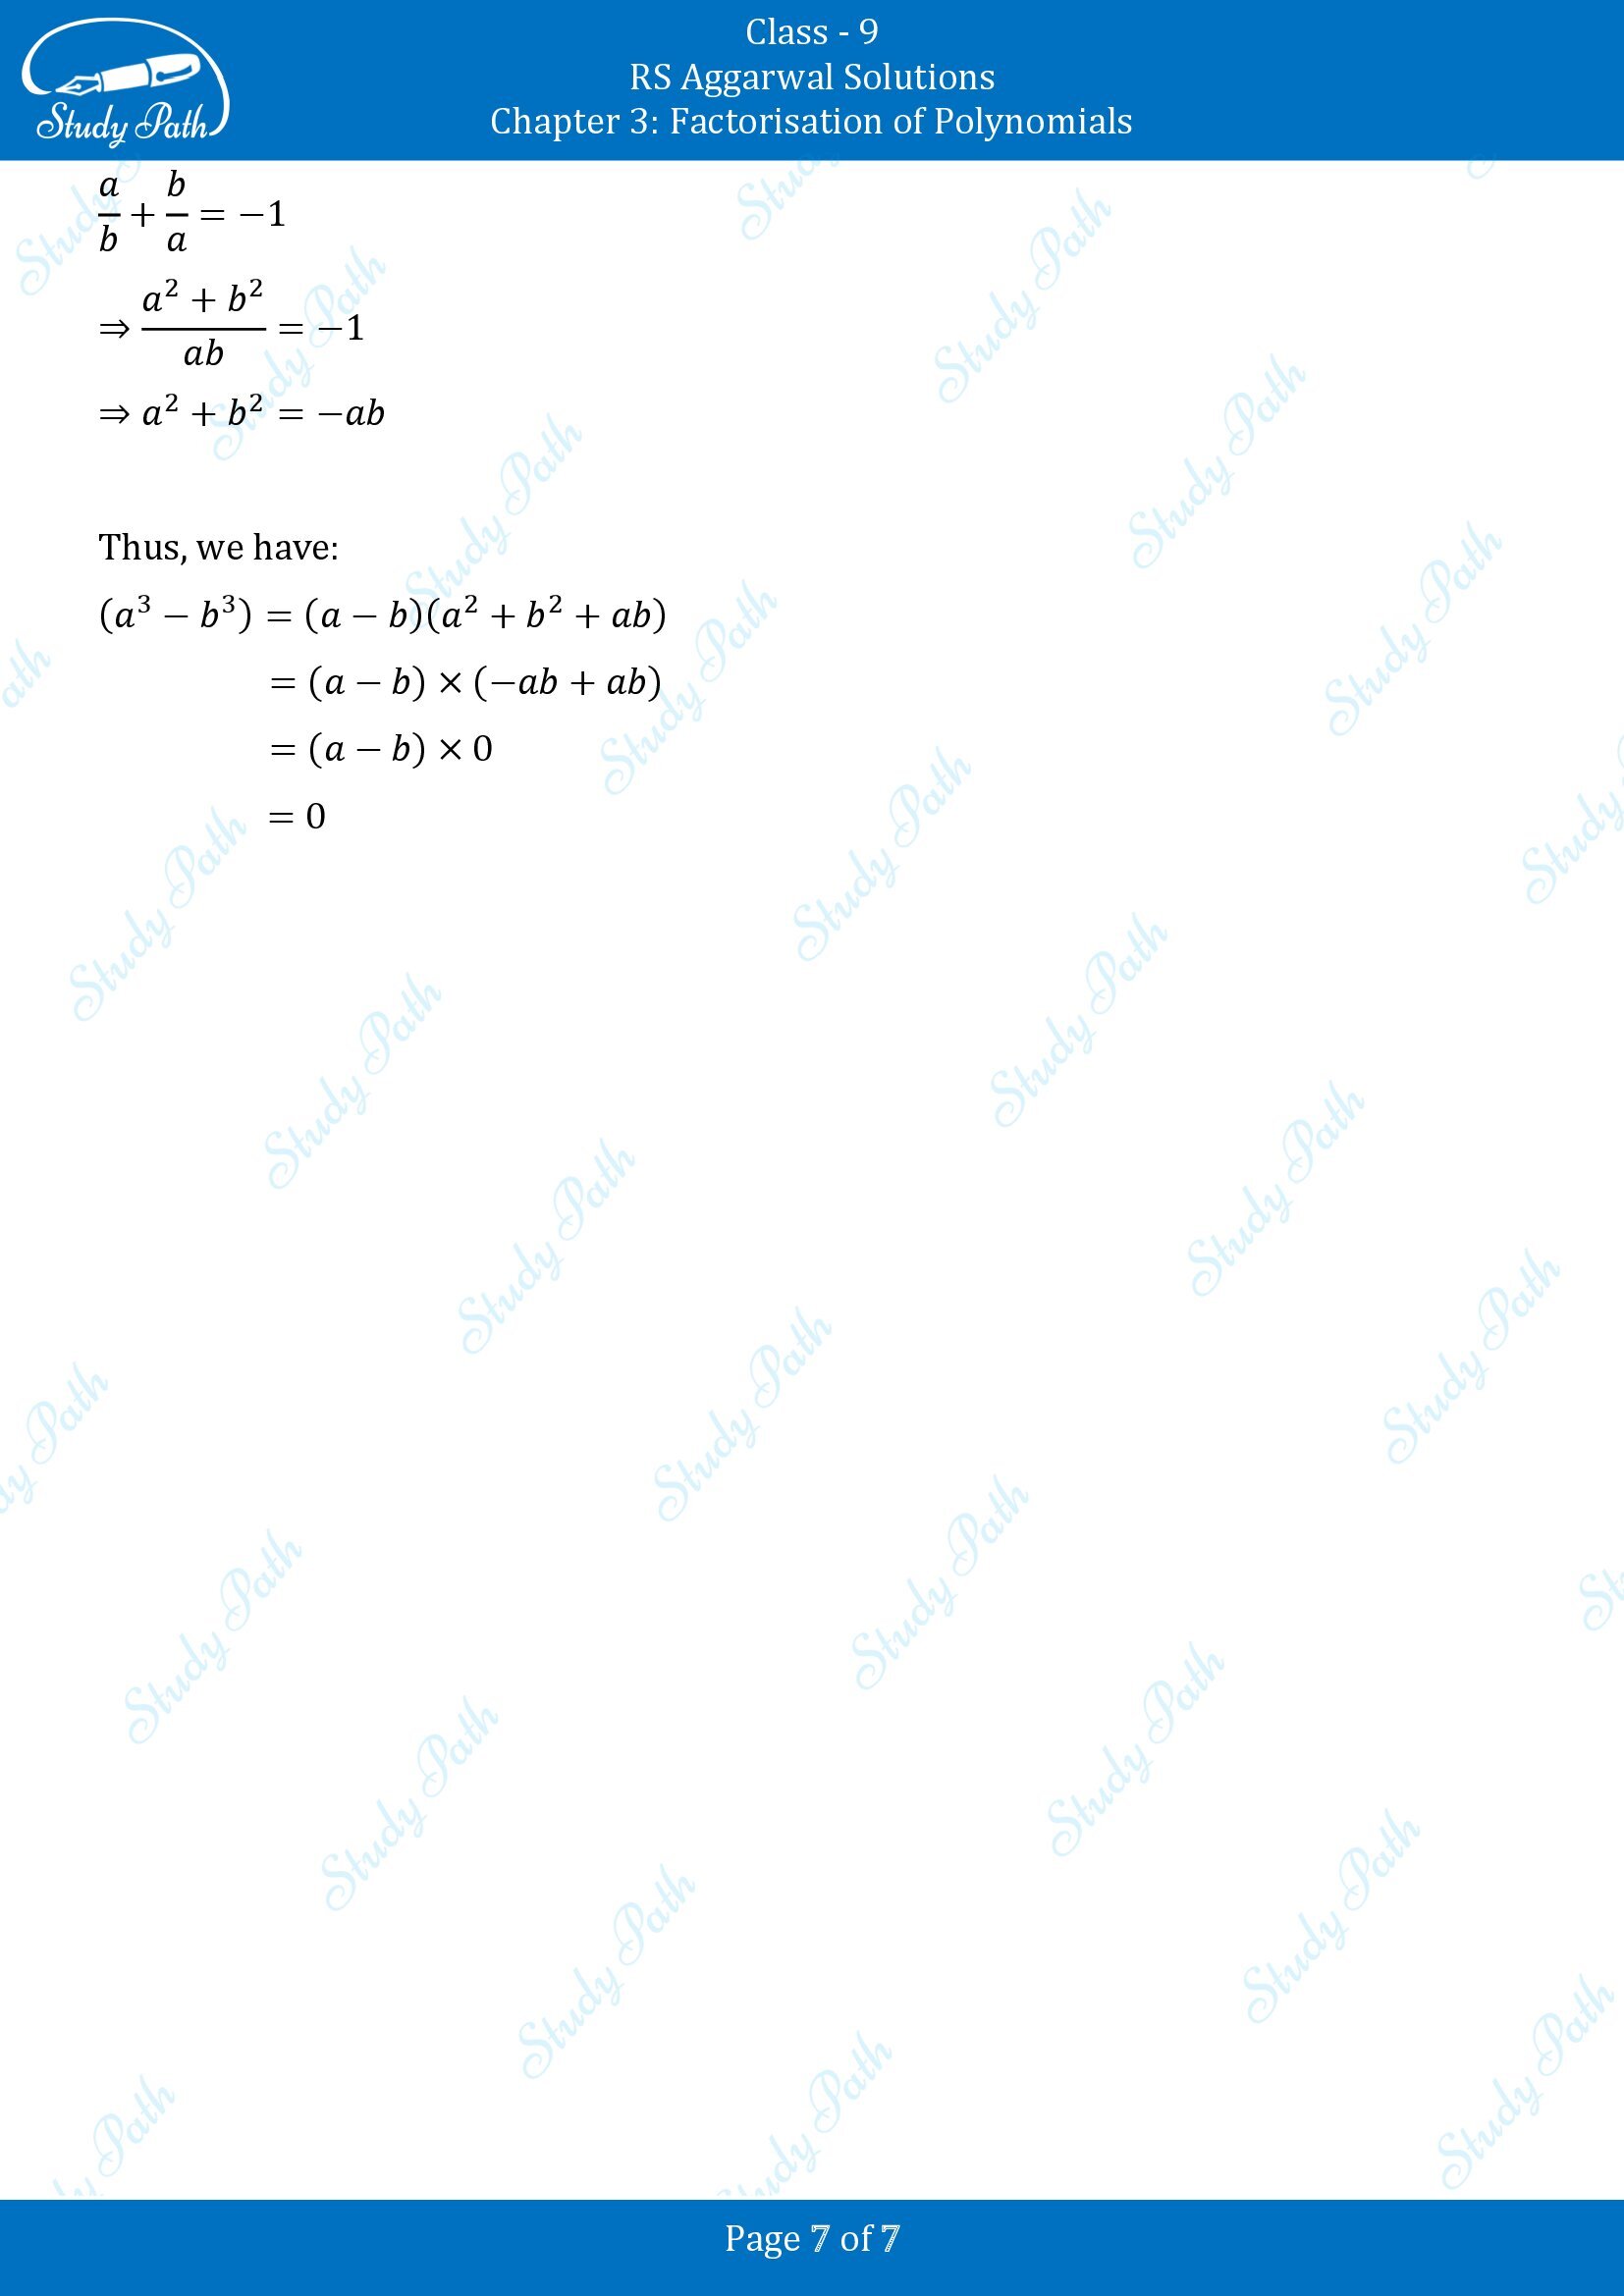 RS Aggarwal Solutions Class 9 Chapter 3 Factorisation of Polynomials Multiple Choice Questions MCQs 00007